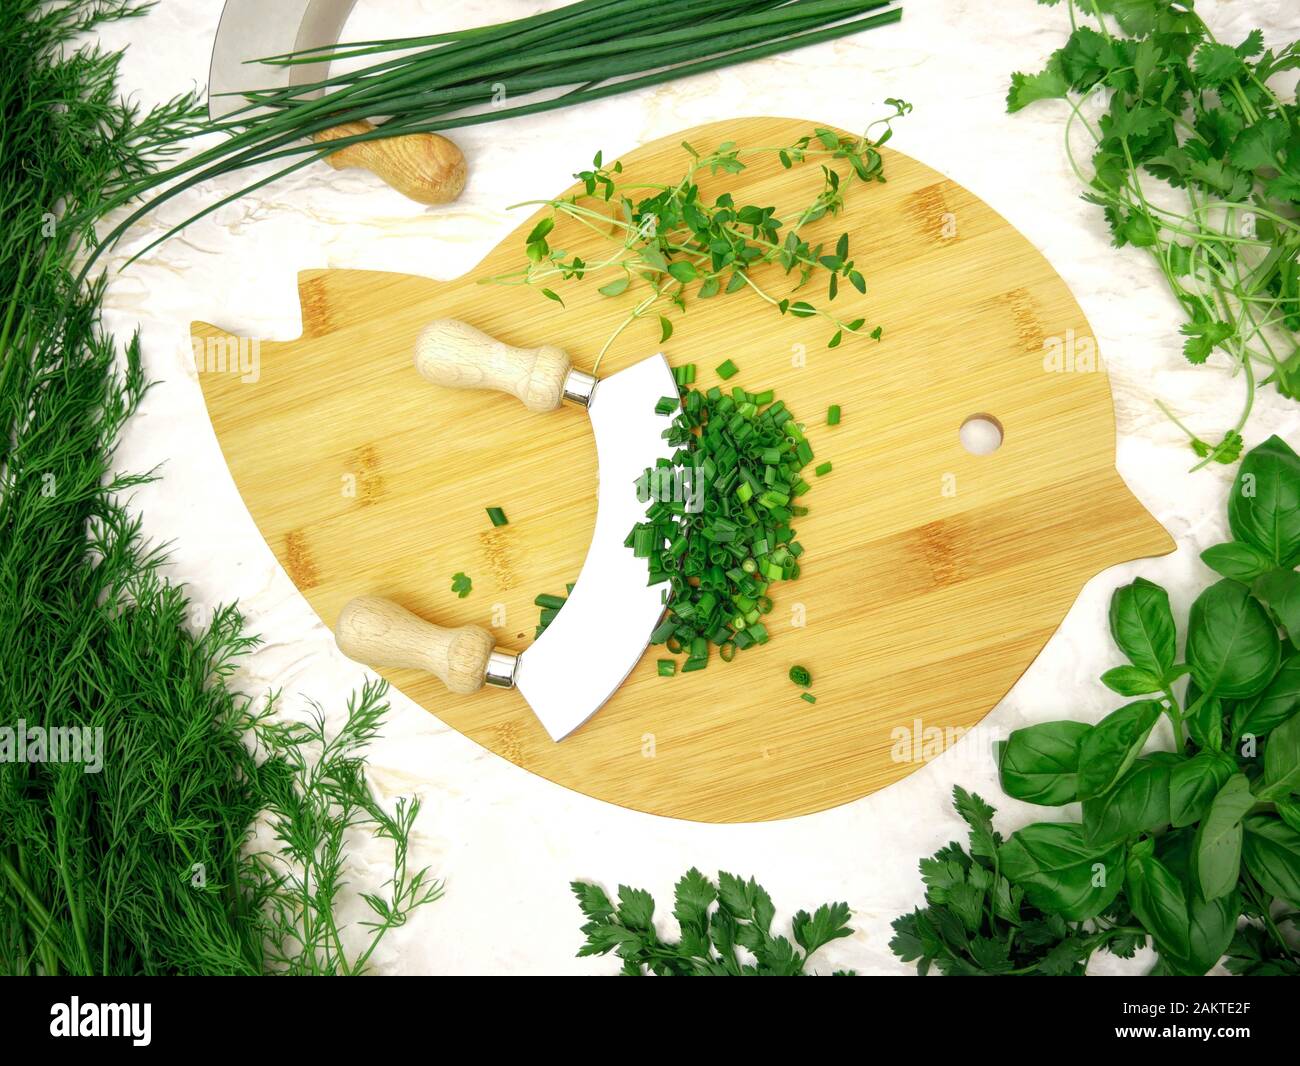 Parsley Chopper stock image. Image of kitchen, tool, chopper - 59443991